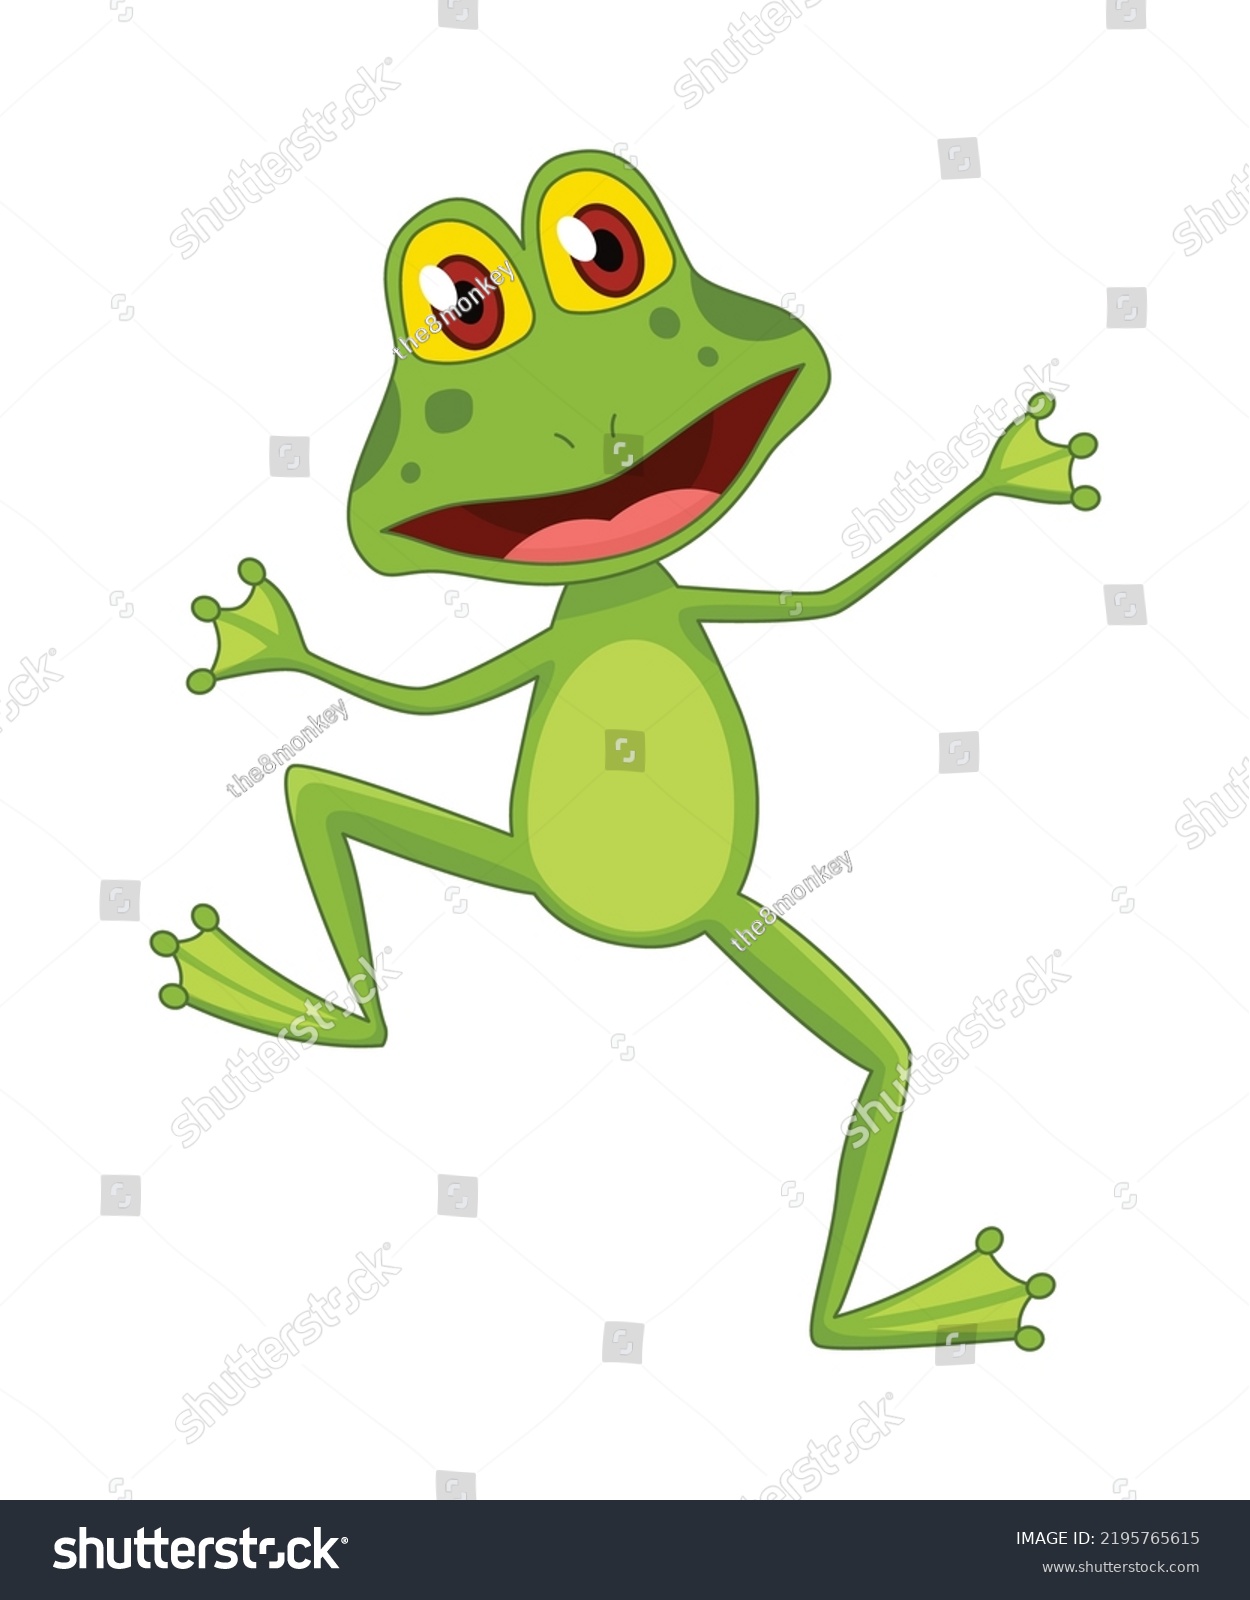 SVG of Cartoon frogs Funny cartoon frog. Little amphibia character standing and smiling on white background. Adorable froggy watching svg